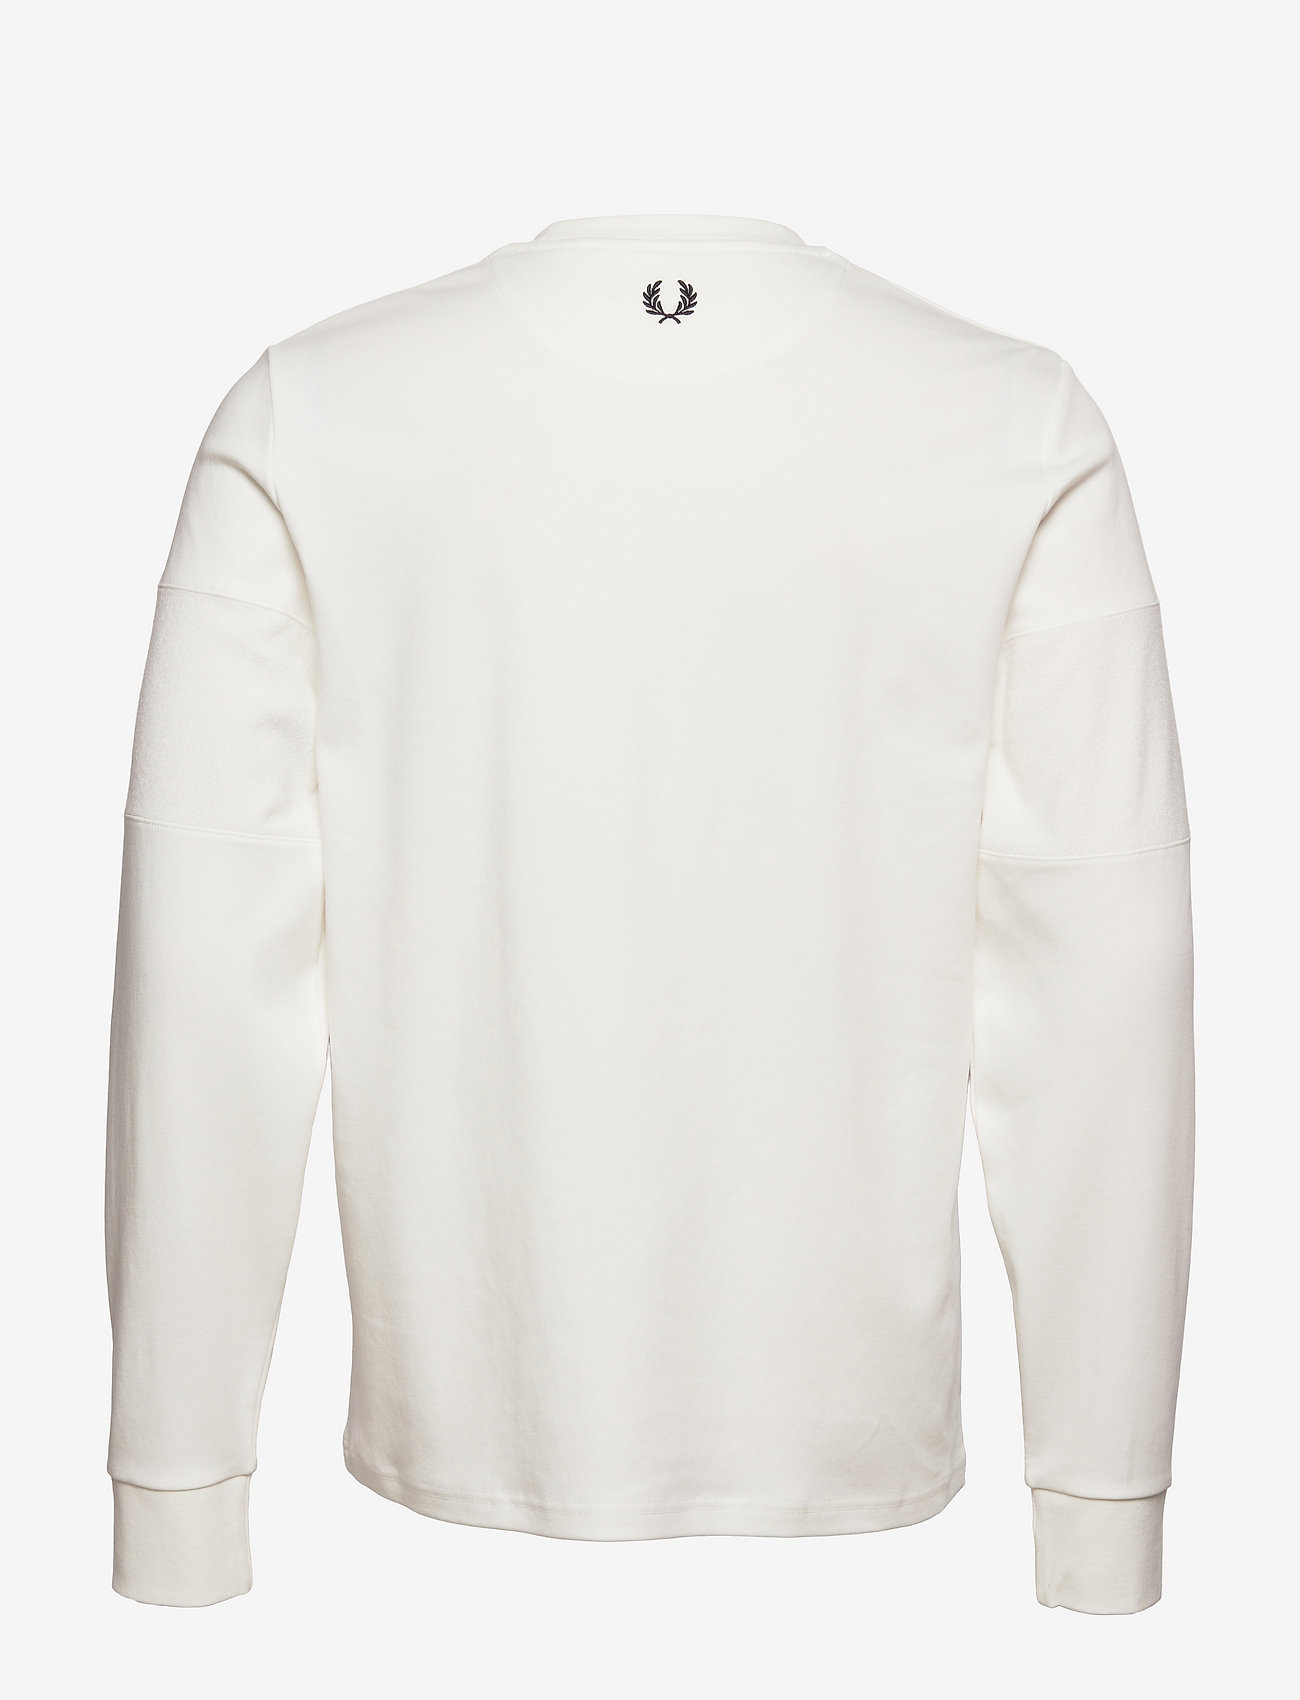 Fred Perry Towelling Panel Longsleeve Top